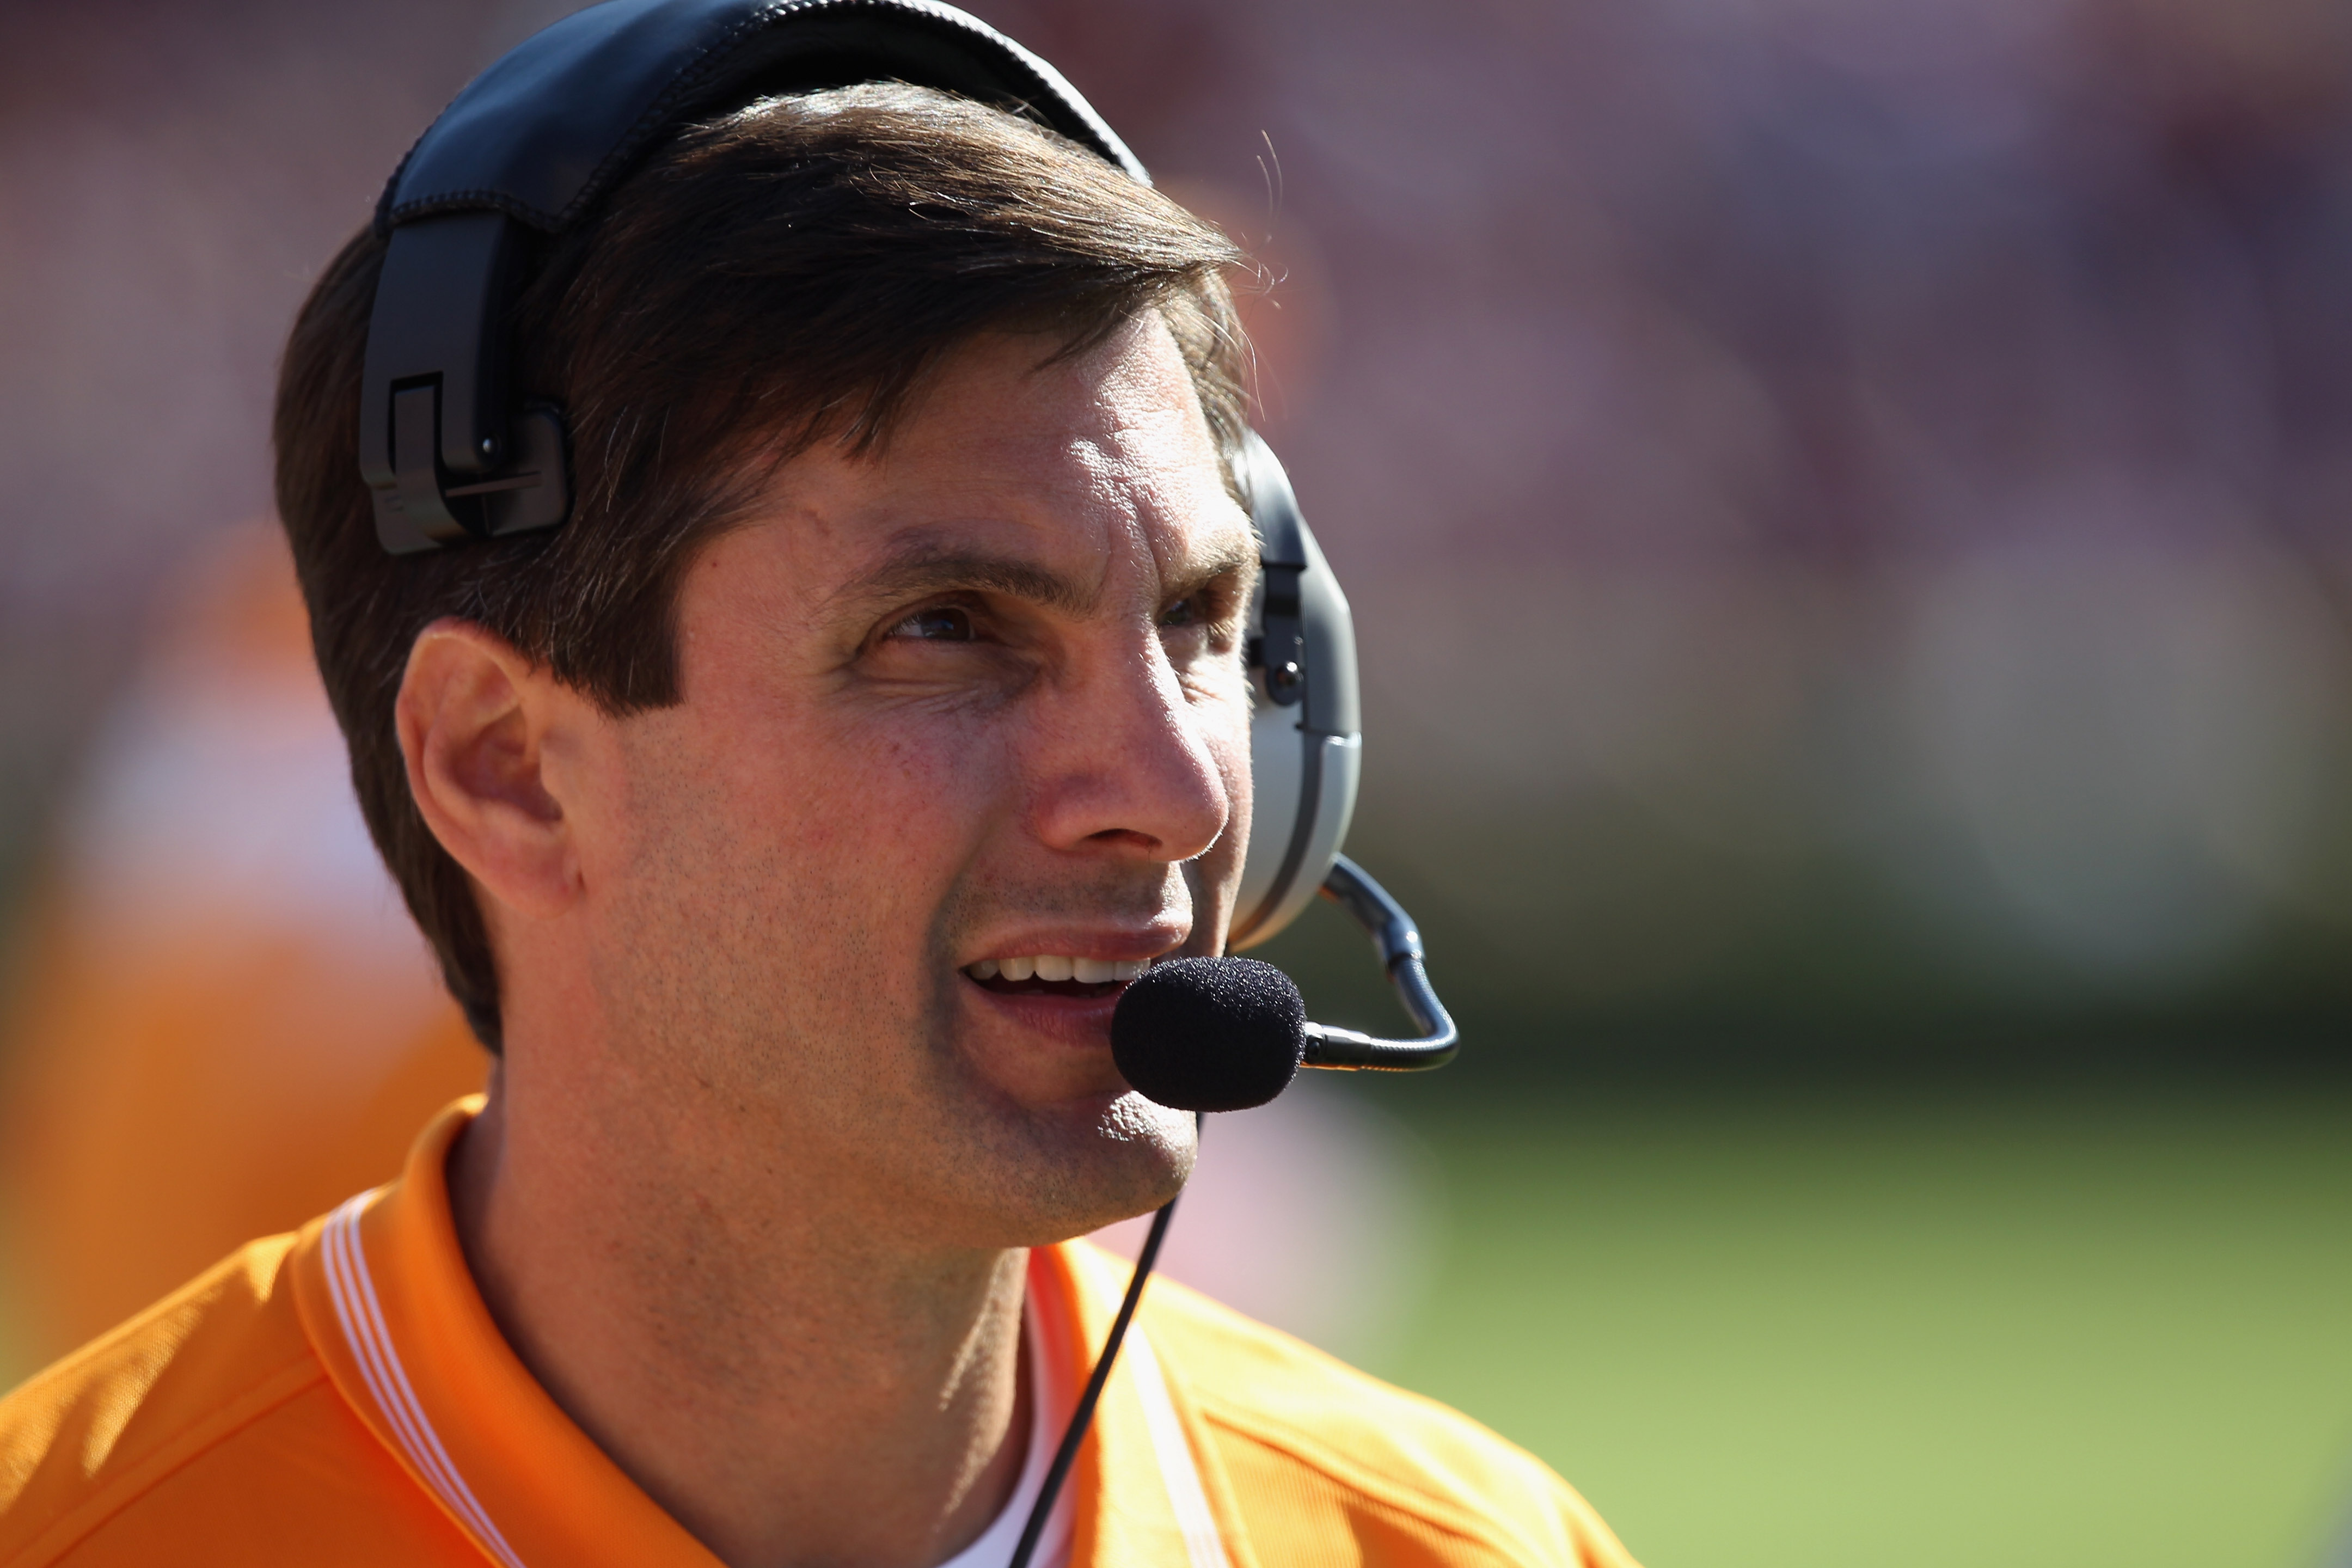 COLUMBIA, SC - OCTOBER 30:  Head coach Derek Dooley of the Tennessee Volunteers watches on against the South Carolina Gamecocks during their game at Williams-Brice Stadium on October 30, 2010 in Columbia, South Carolina.  (Photo by Streeter Lecka/Getty Im